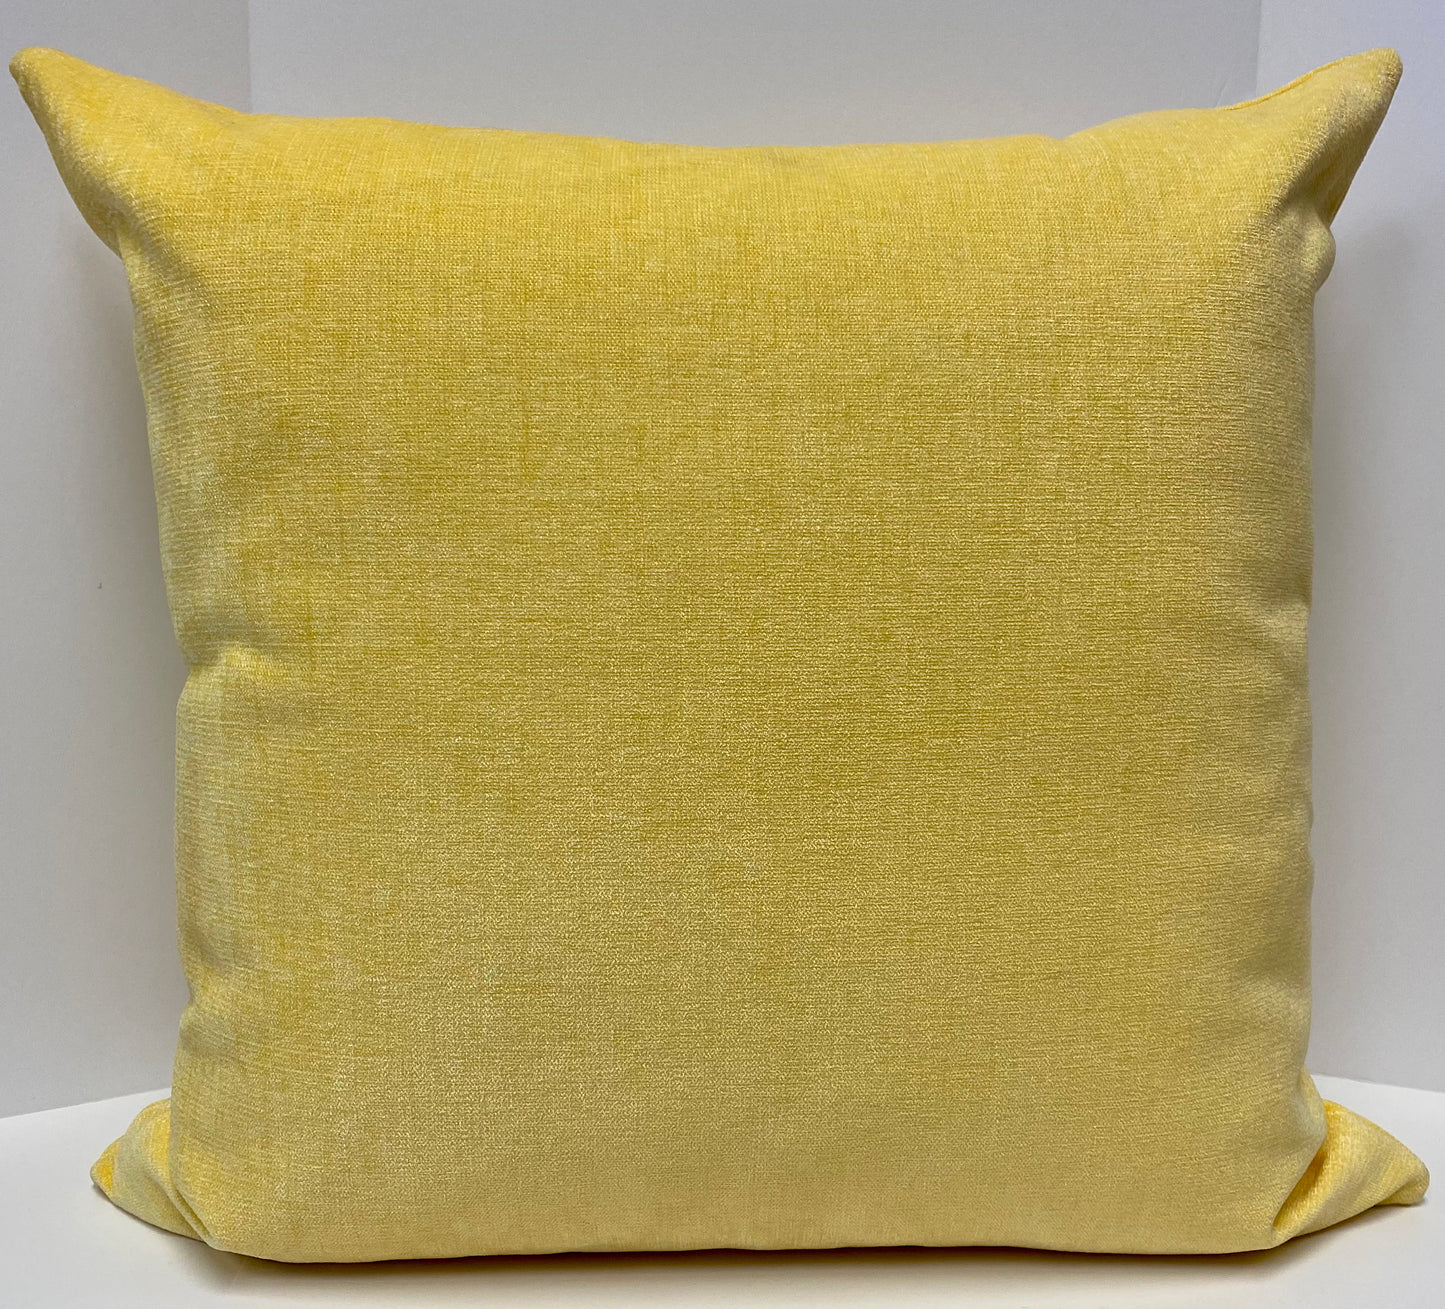 Luxury Pillow -  24" x 24" - Lemon Zest; Bright Yellow Solid Front and Back